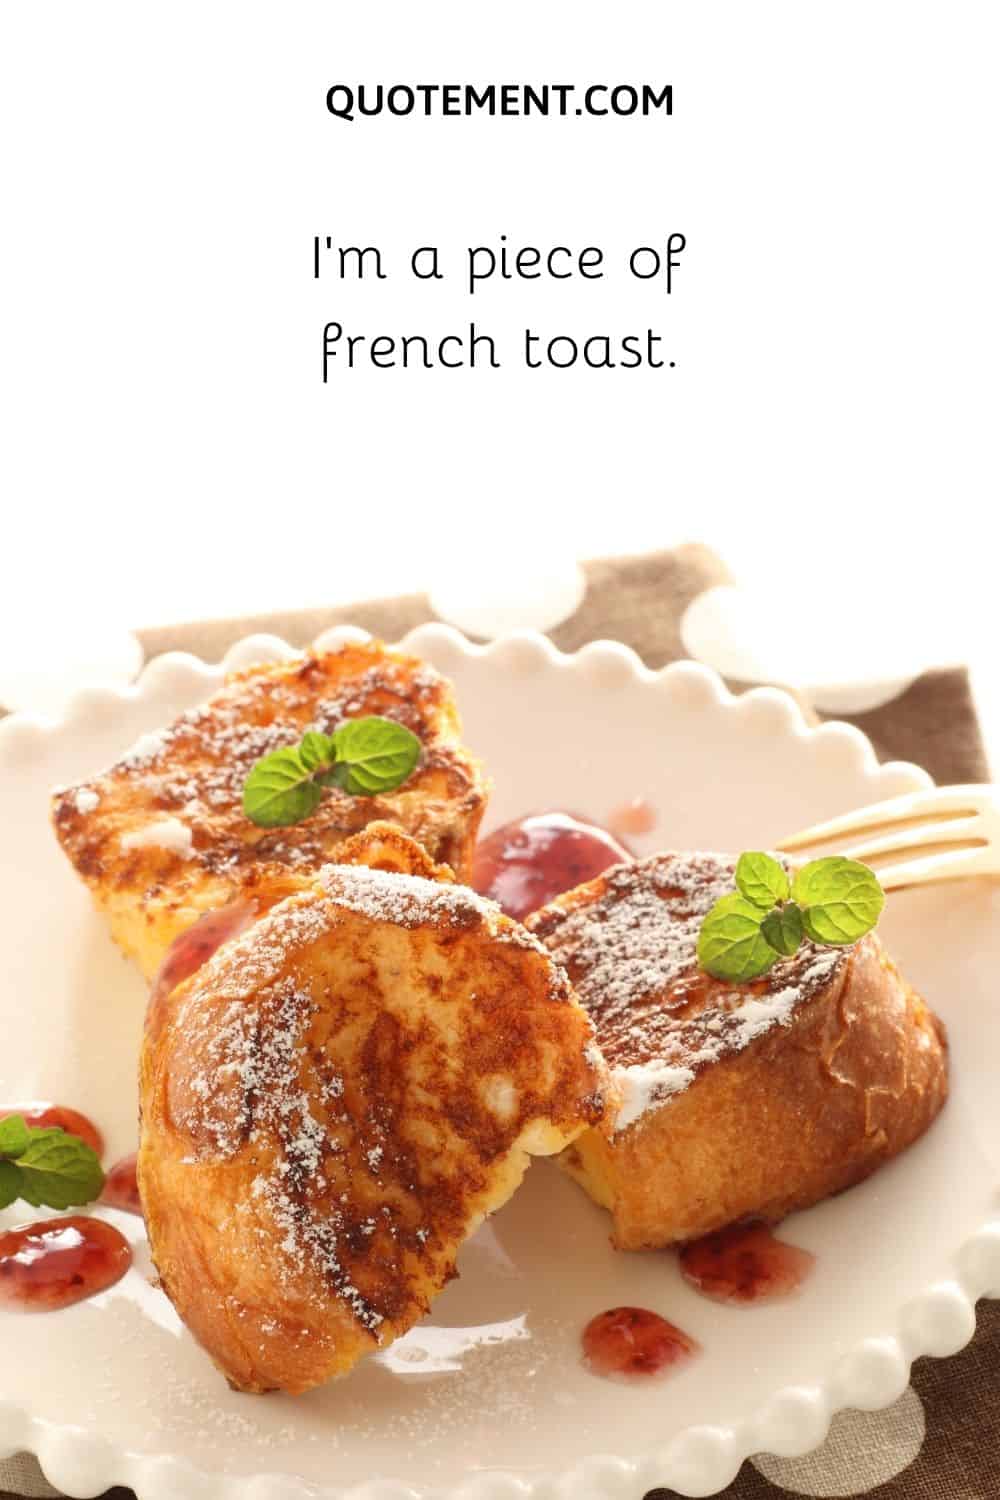 I’m a piece of french toast